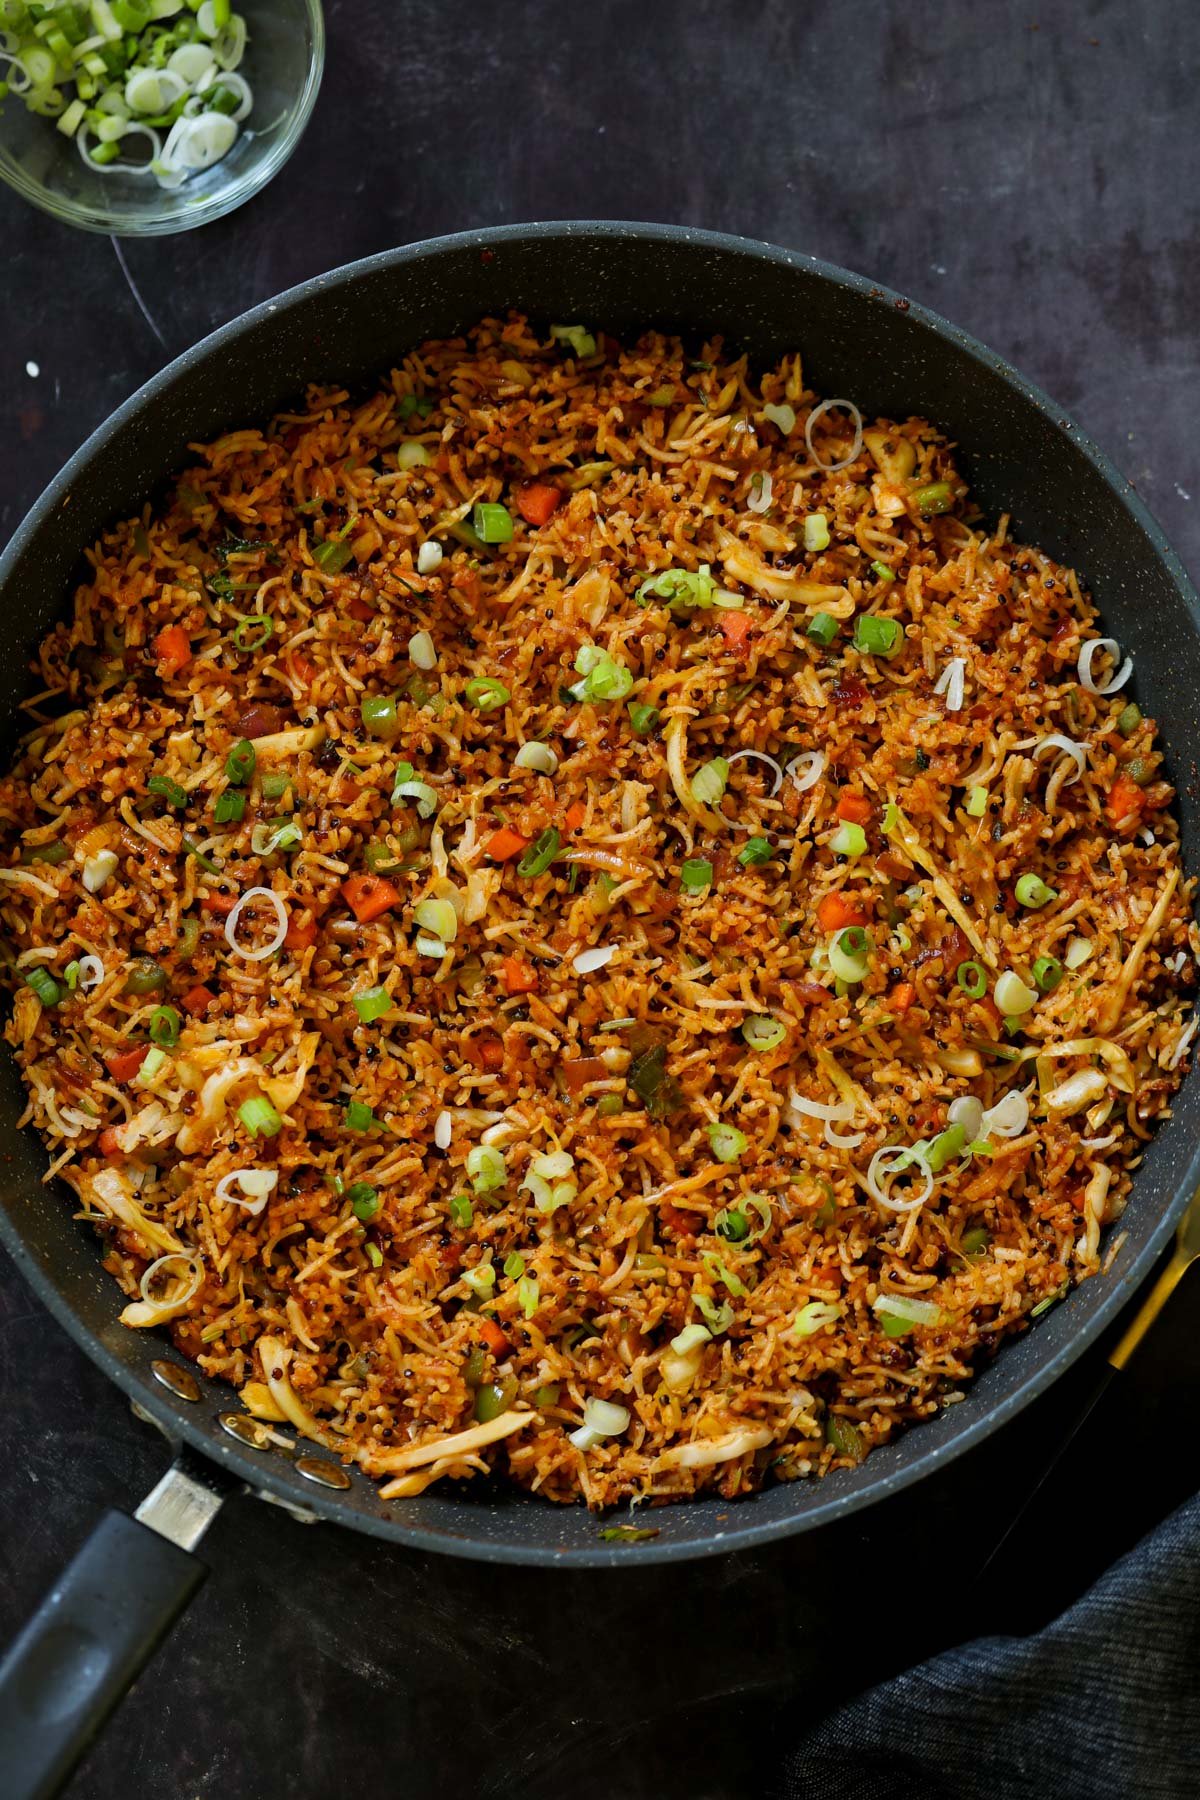 Schezwan fried rice in the pan with green onions for garnish